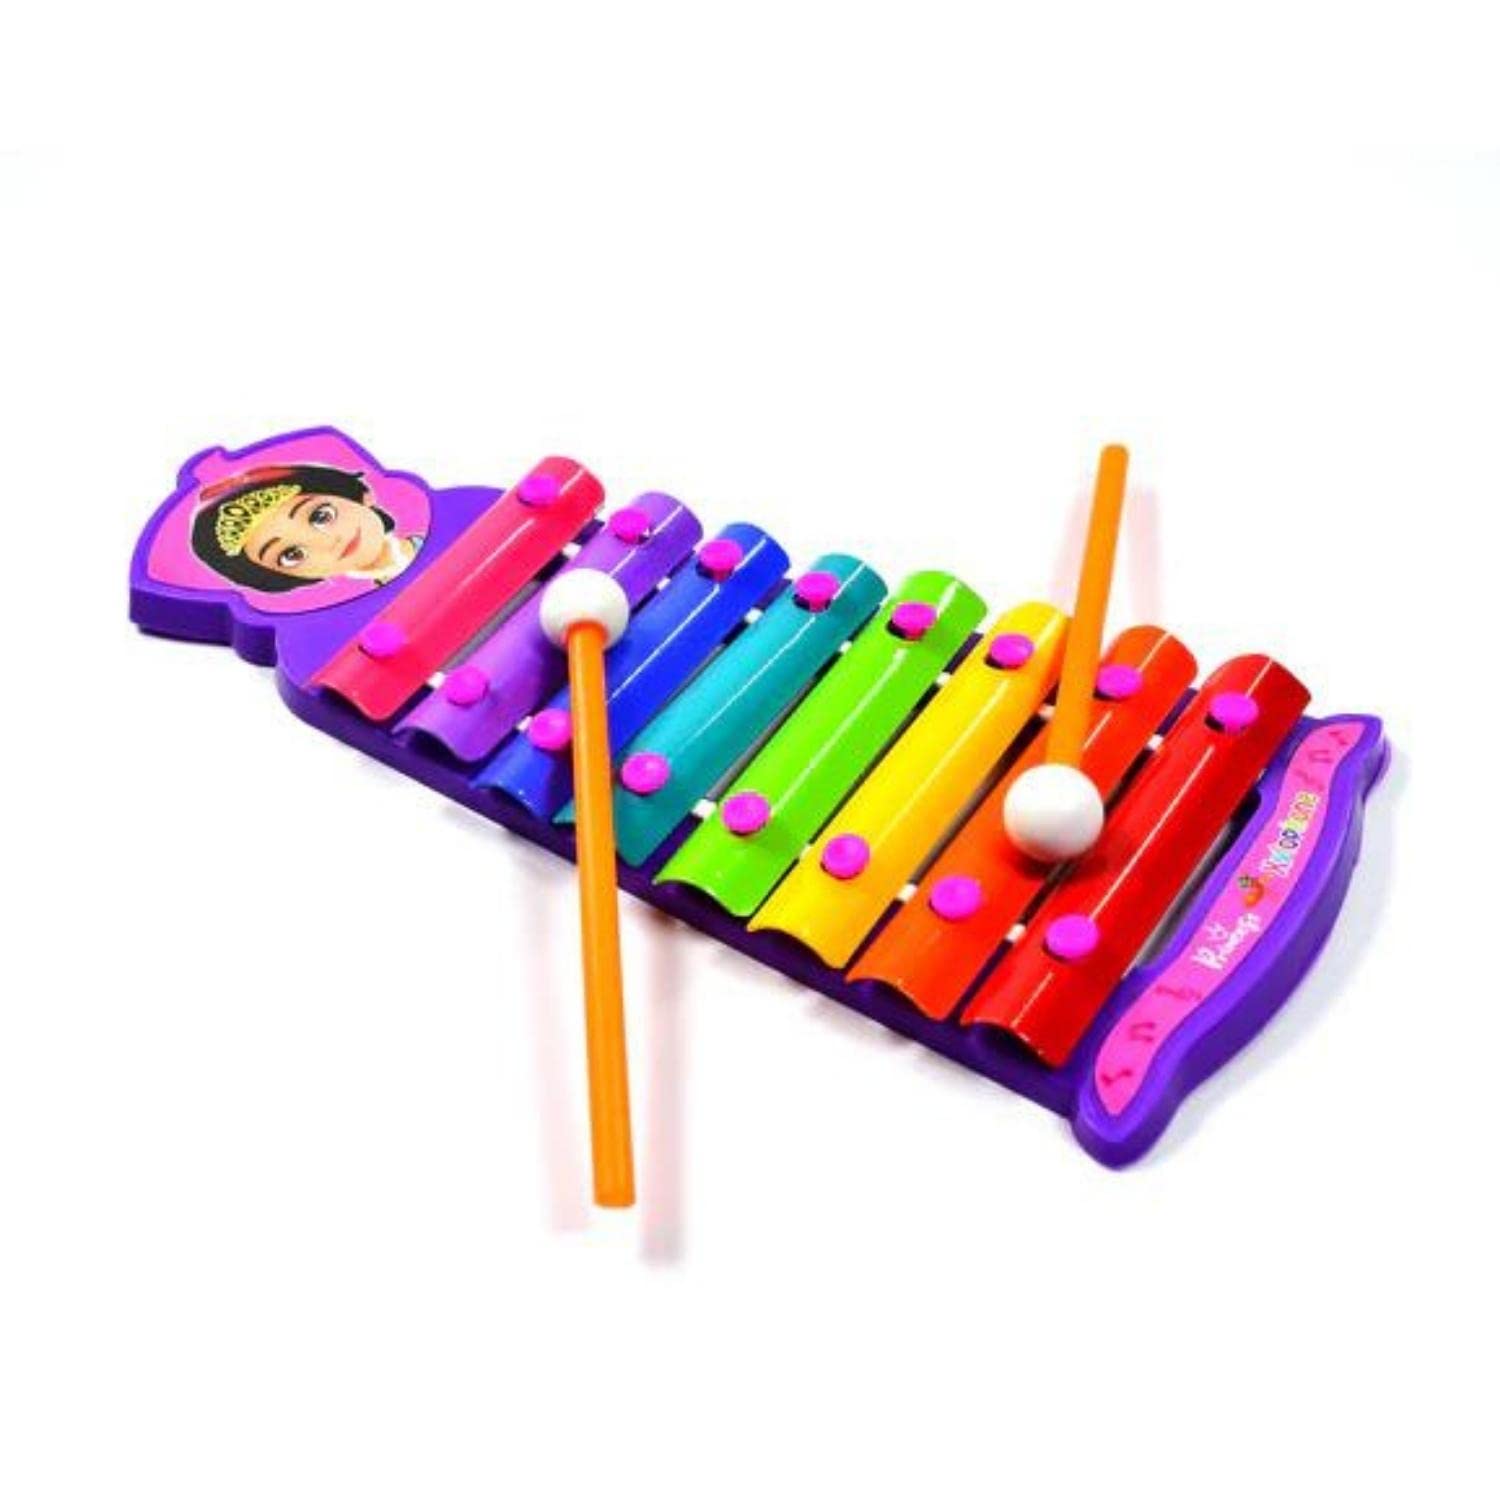 KIDS MANDI Wooden Xylophone Glockenspiel Musical Toy for Toddlers